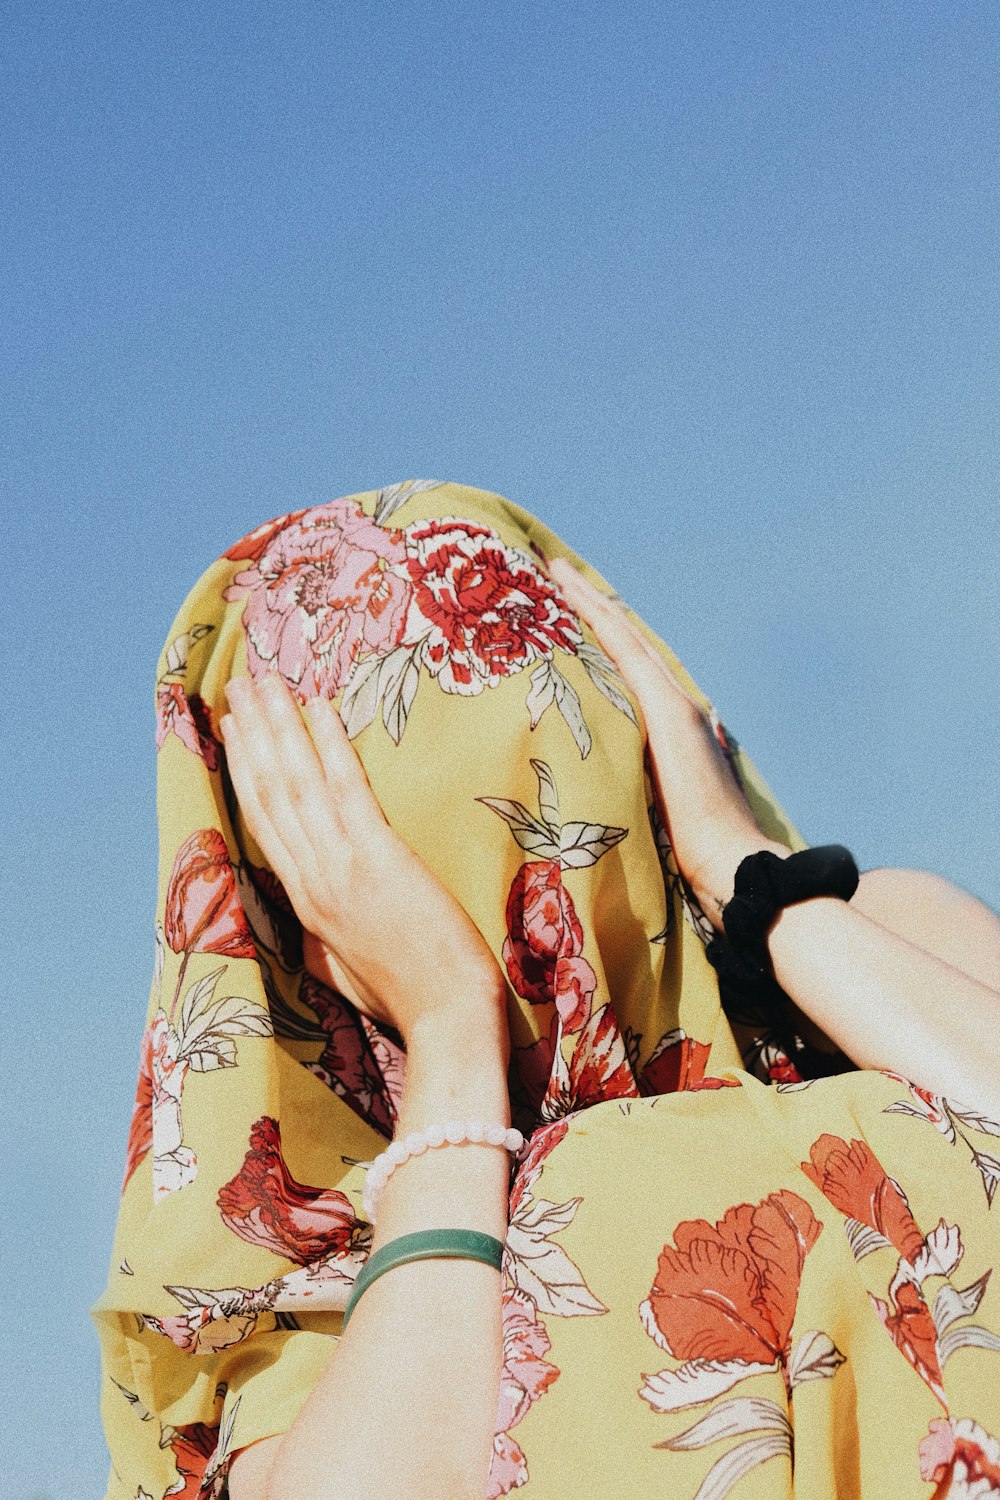 woman covering her face with yellow floral headdress